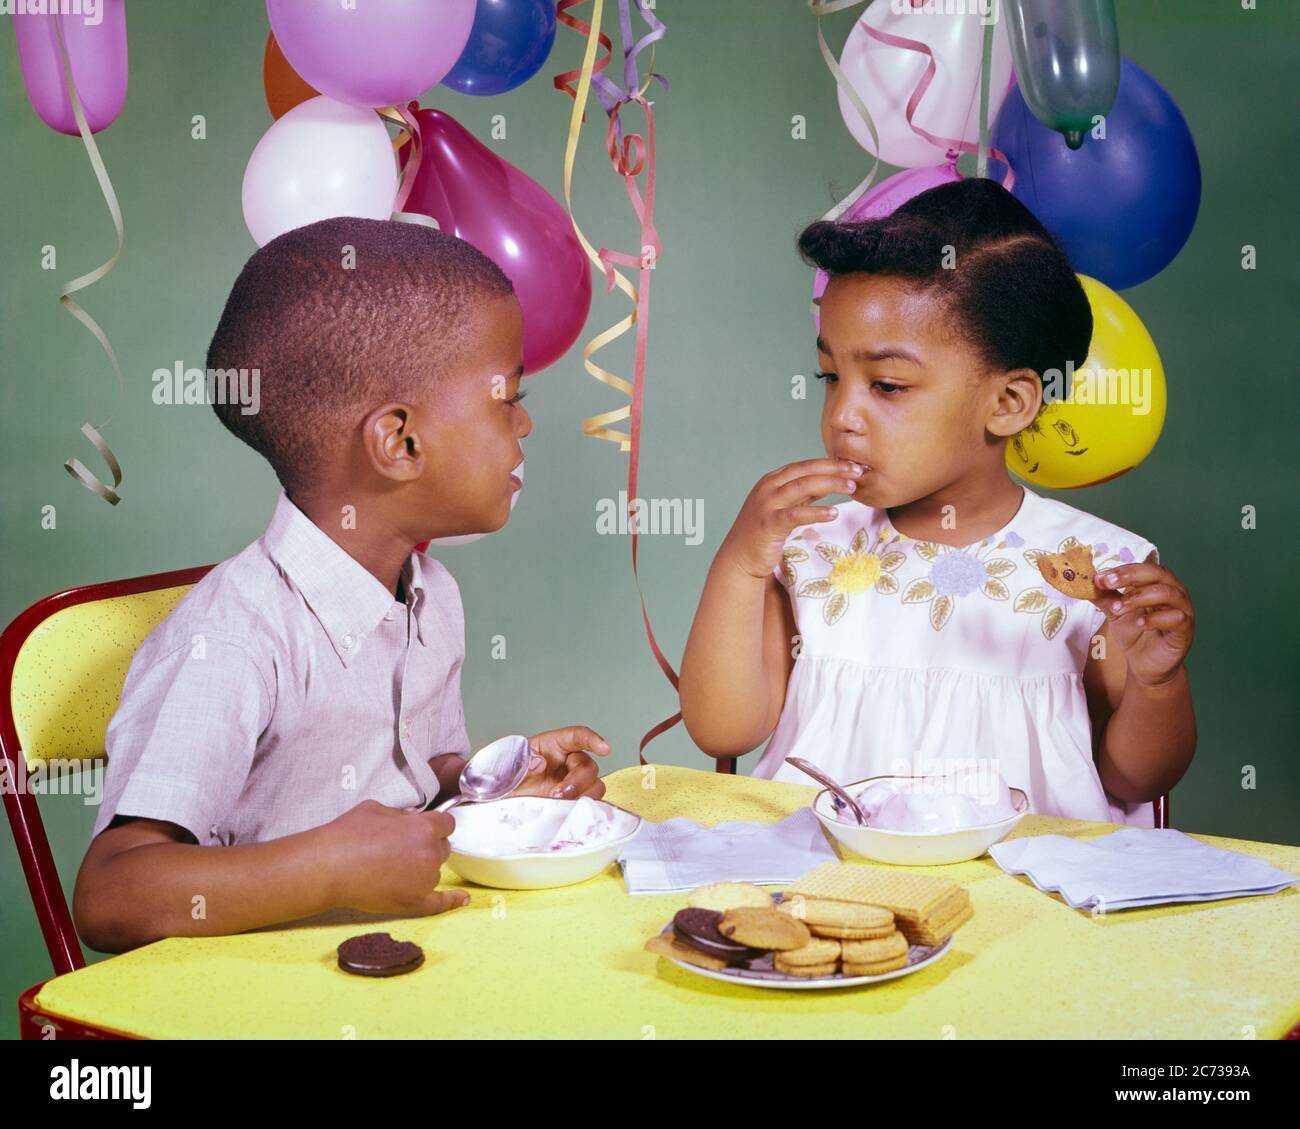 1960s AFRICAN-AMERICAN BOY AND GIRL SHARING EATING ICE CREAM AND COOKIES TOGETHER AT BIRTHDAY PARTY  - kn530 HAR001 HARS STREAMERS STUDIO SHOT HOME LIFE COPY SPACE FRIENDSHIP MALES COOKIES SIBLINGS SISTERS HEAD AND SHOULDERS HIGH ANGLE AFRICAN-AMERICANS AFRICAN-AMERICAN AND EXCITEMENT BLACK ETHNICITY PARTIES SIBLING CONNECTION FRIENDLY ICE CREAM GROWTH JUVENILES TOGETHERNESS HAR001 OLD FASHIONED AFRICAN AMERICANS Stock Photo